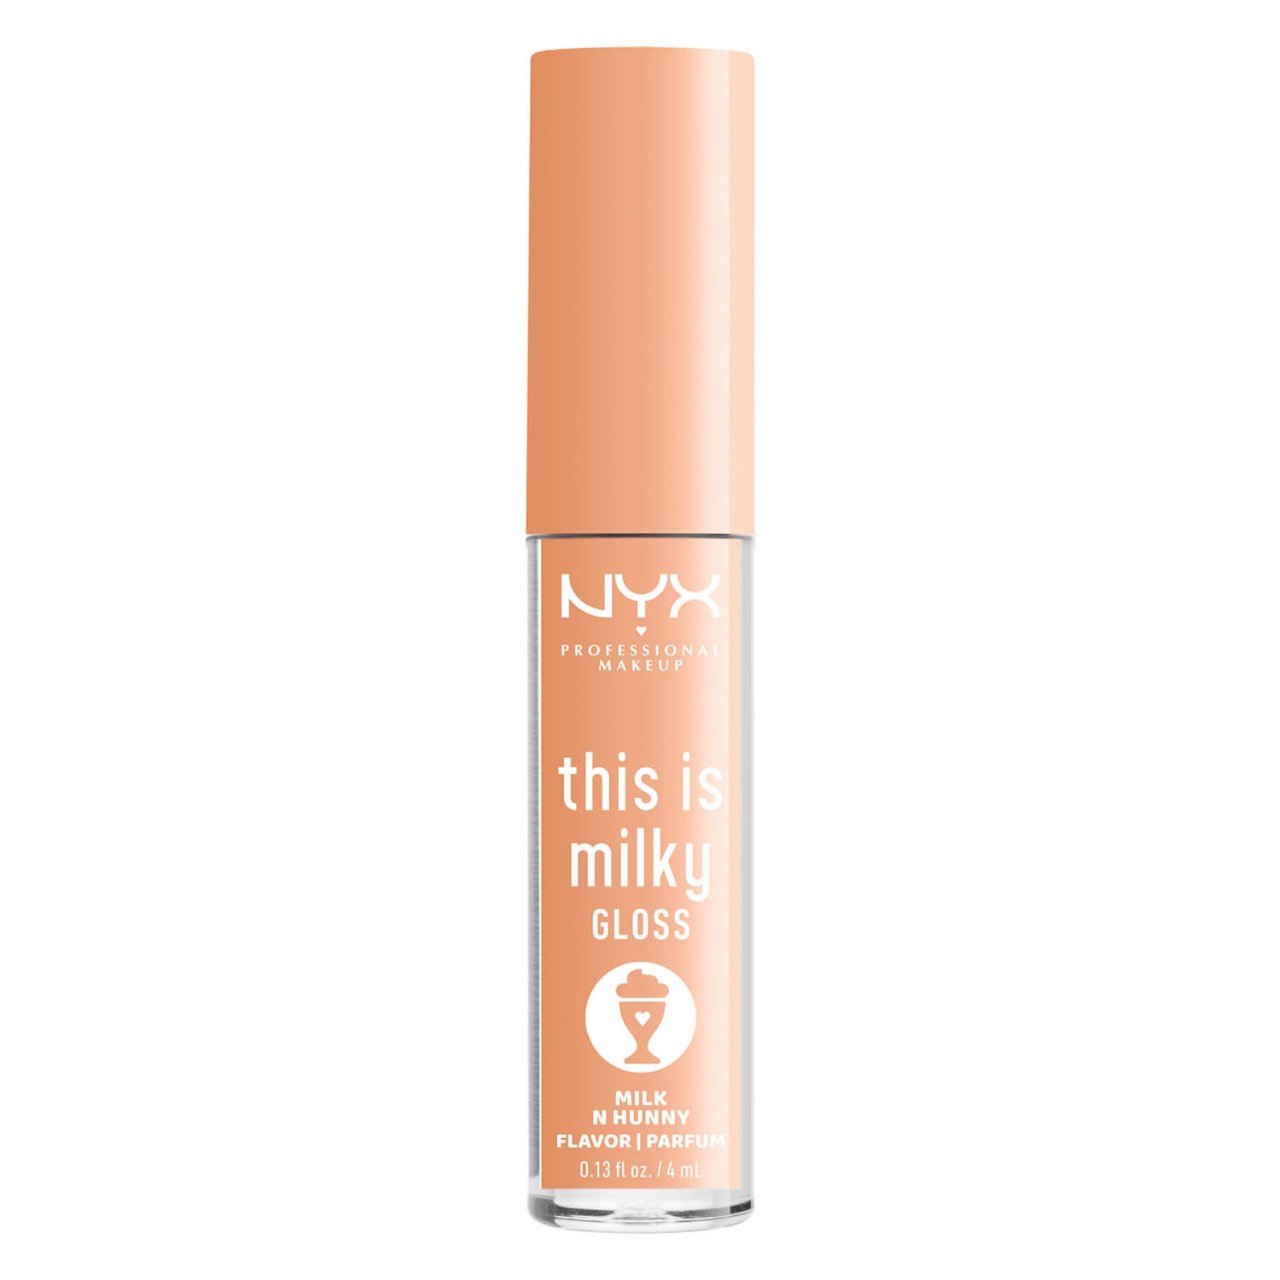 This Is Milky Gloss - Milk N Hunny von NYX Professional Makeup